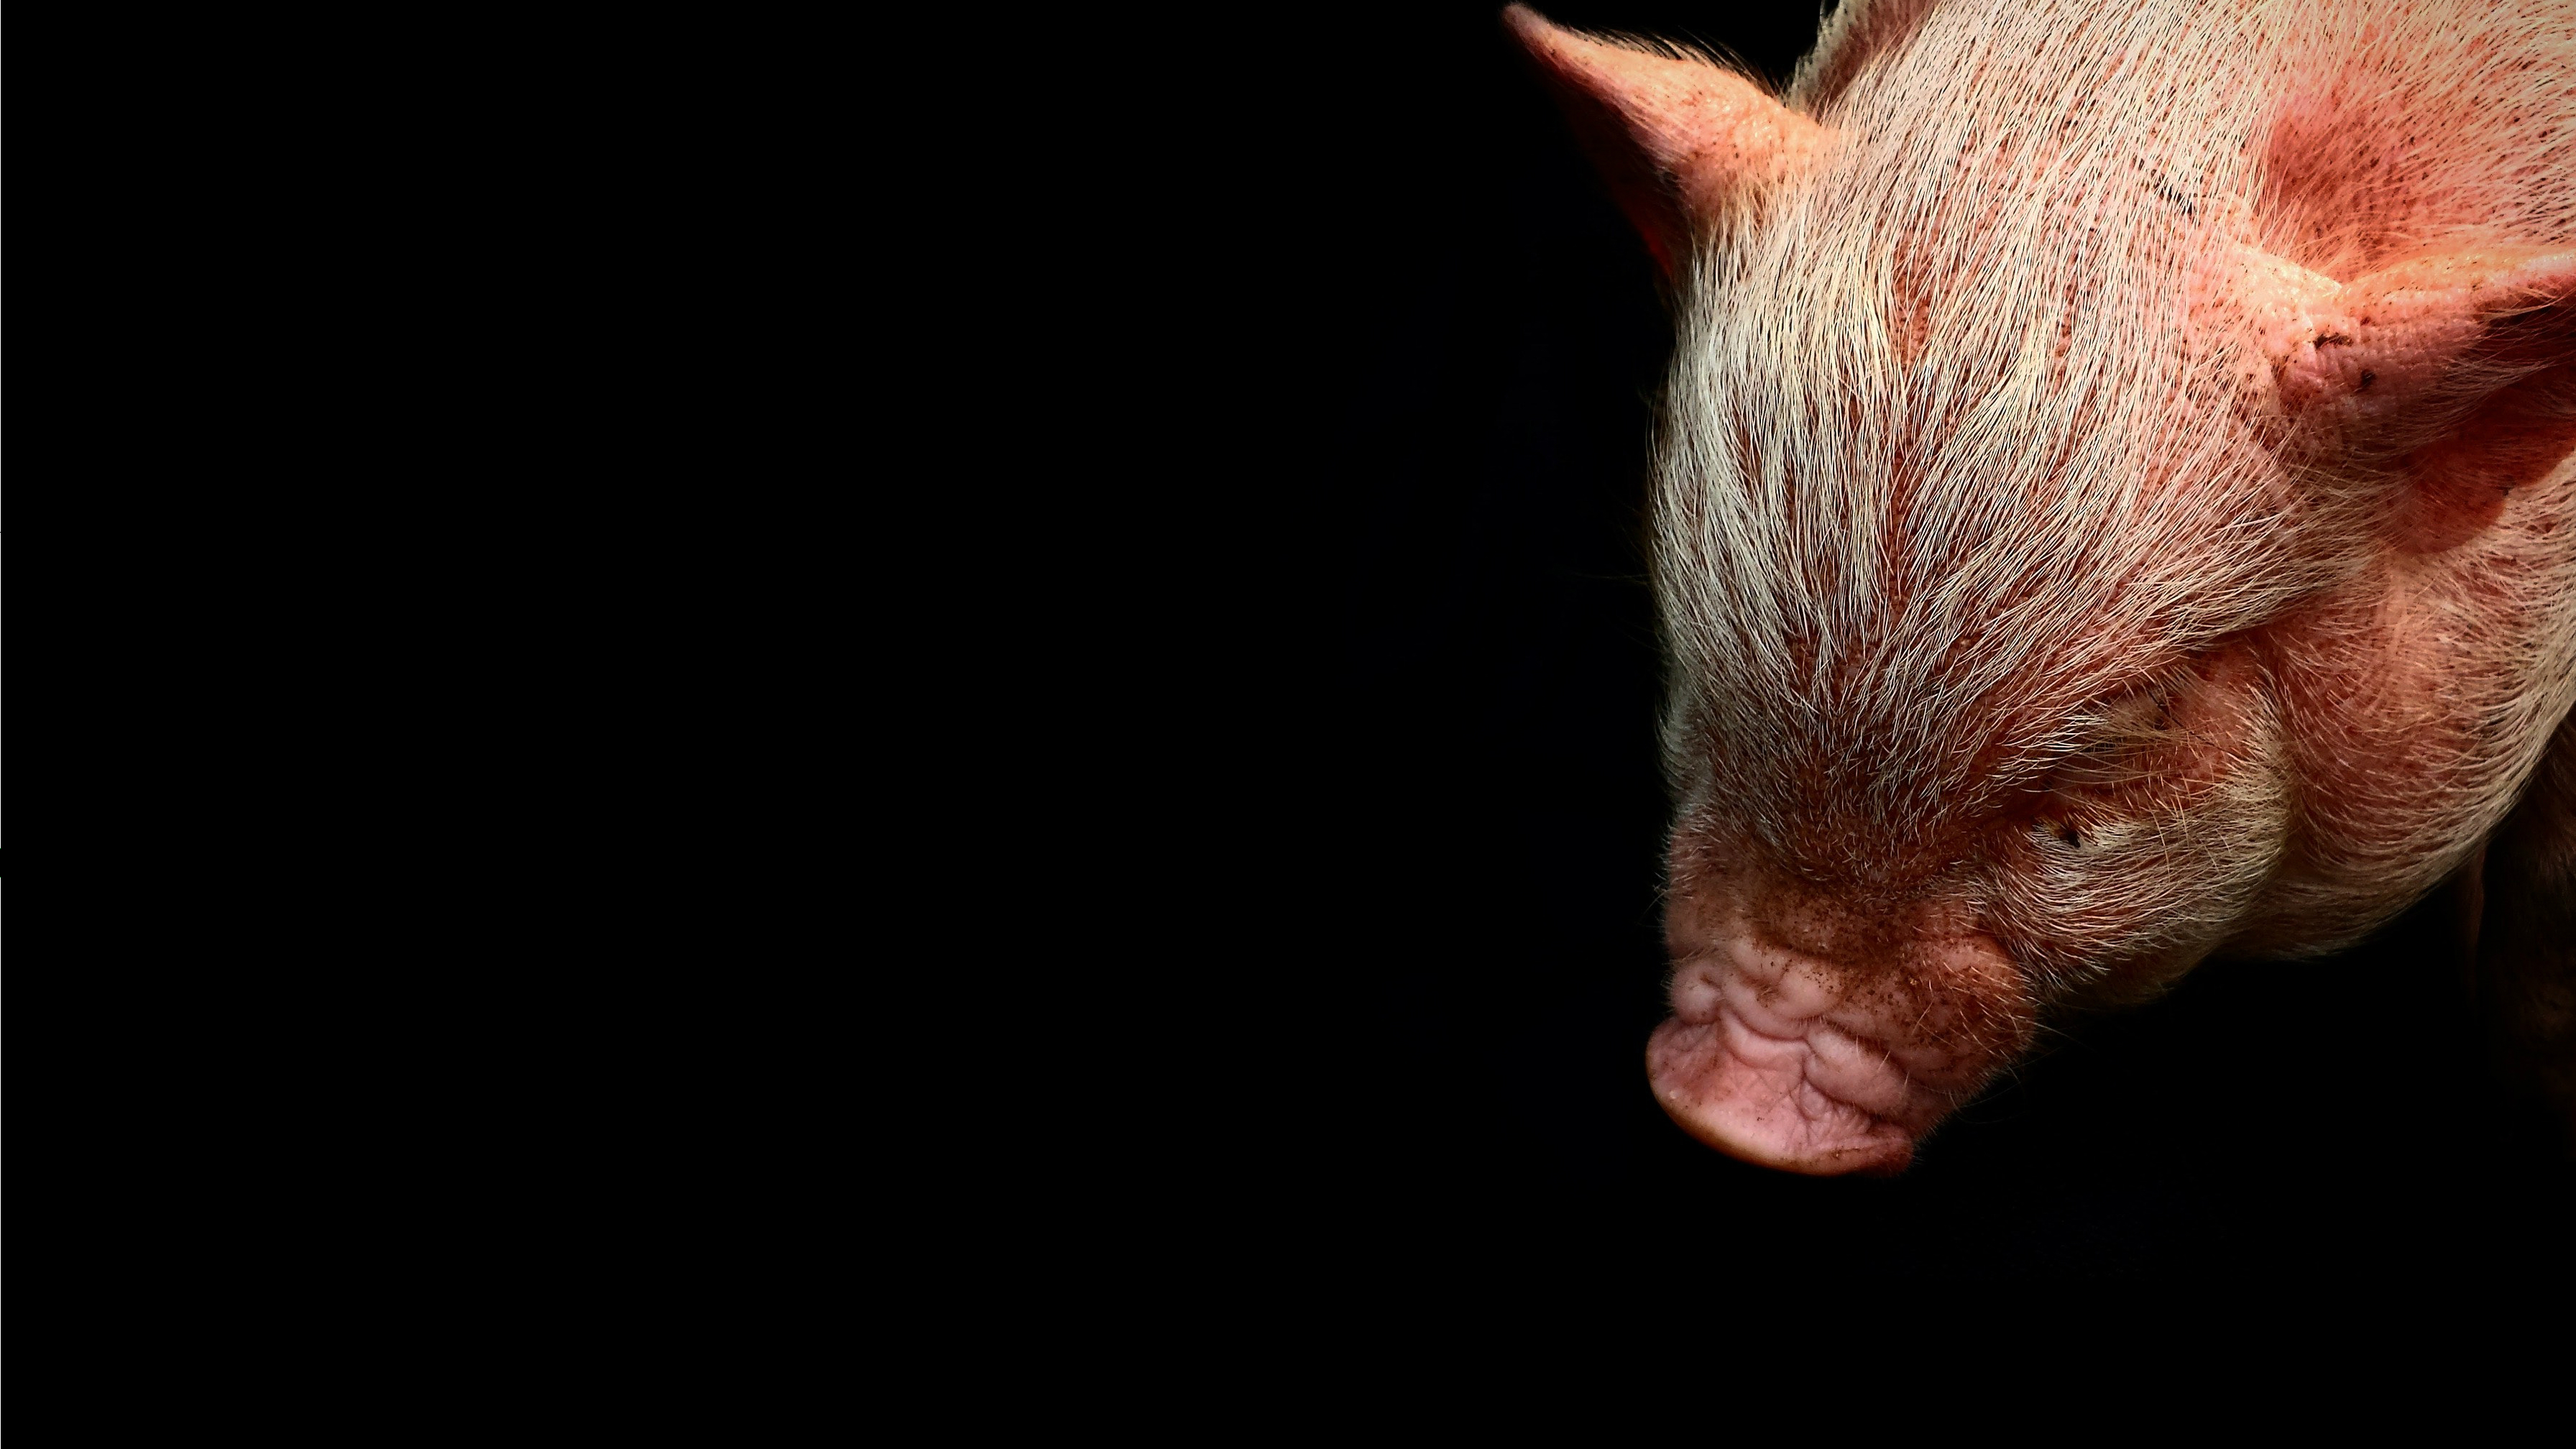 Gene-edited pig kidney keeps monkey alive for 2 years, trial finds